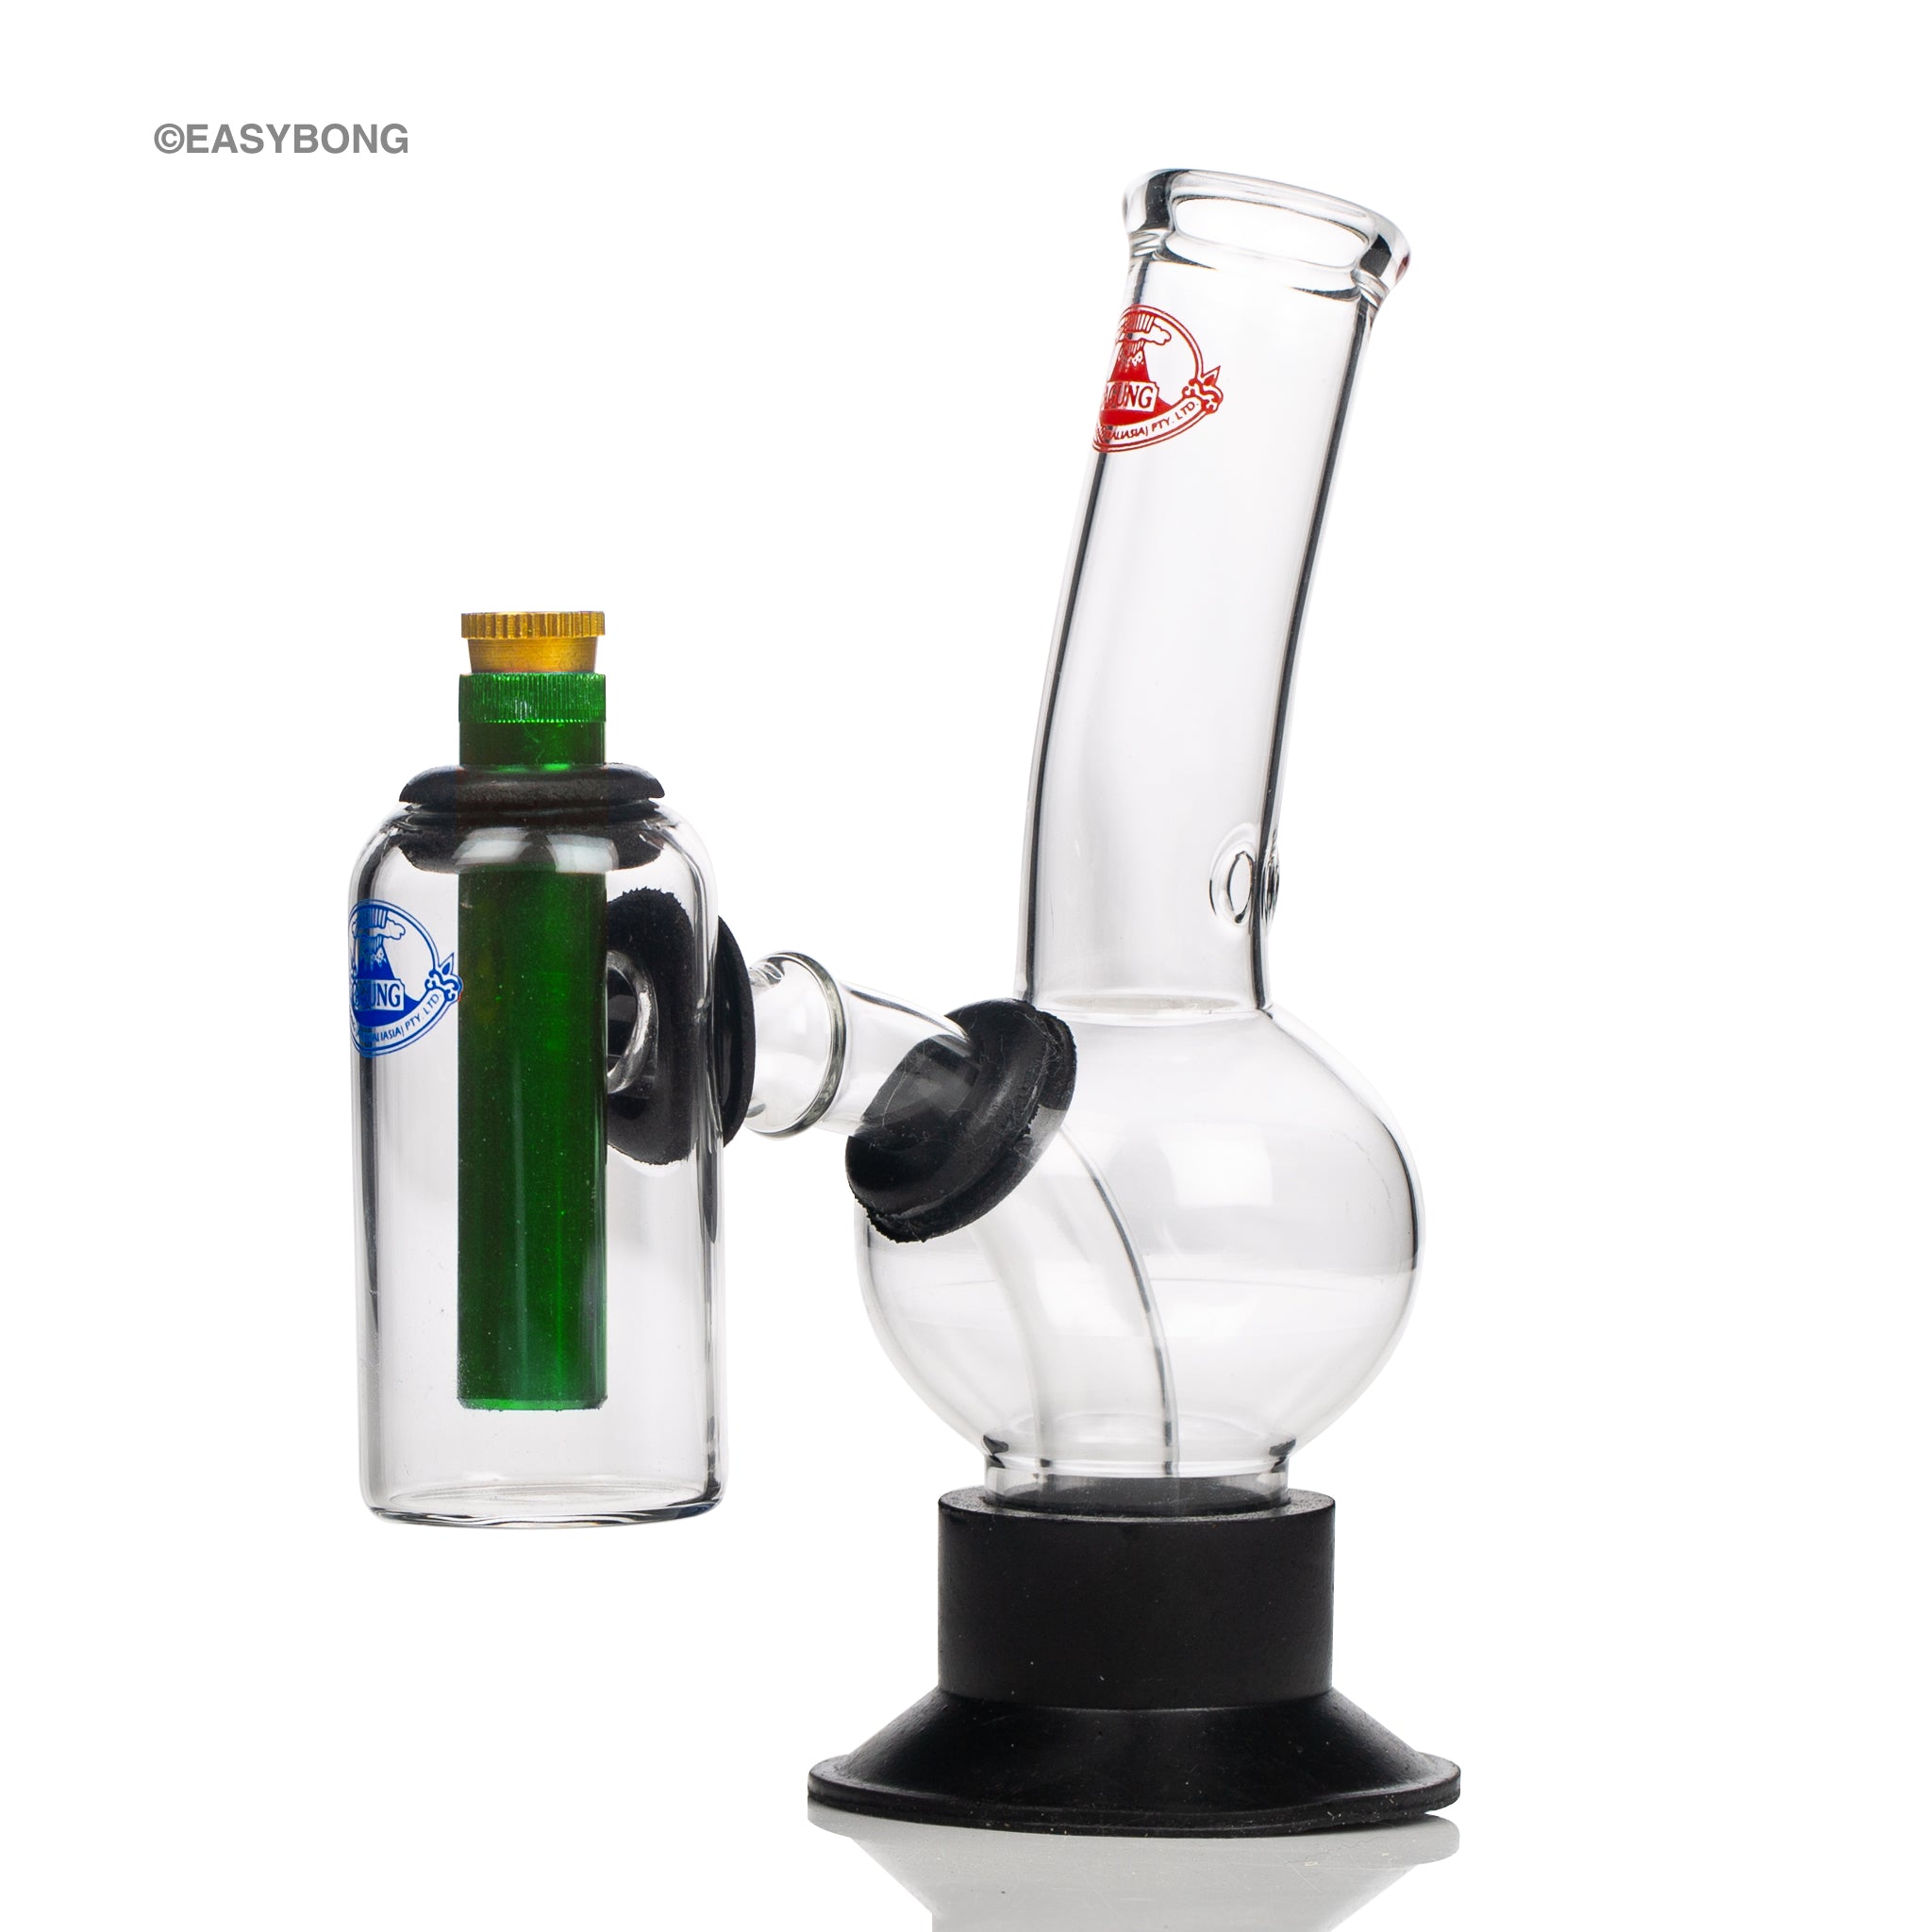 Agung double chamber bong with free shipping Australia wide.